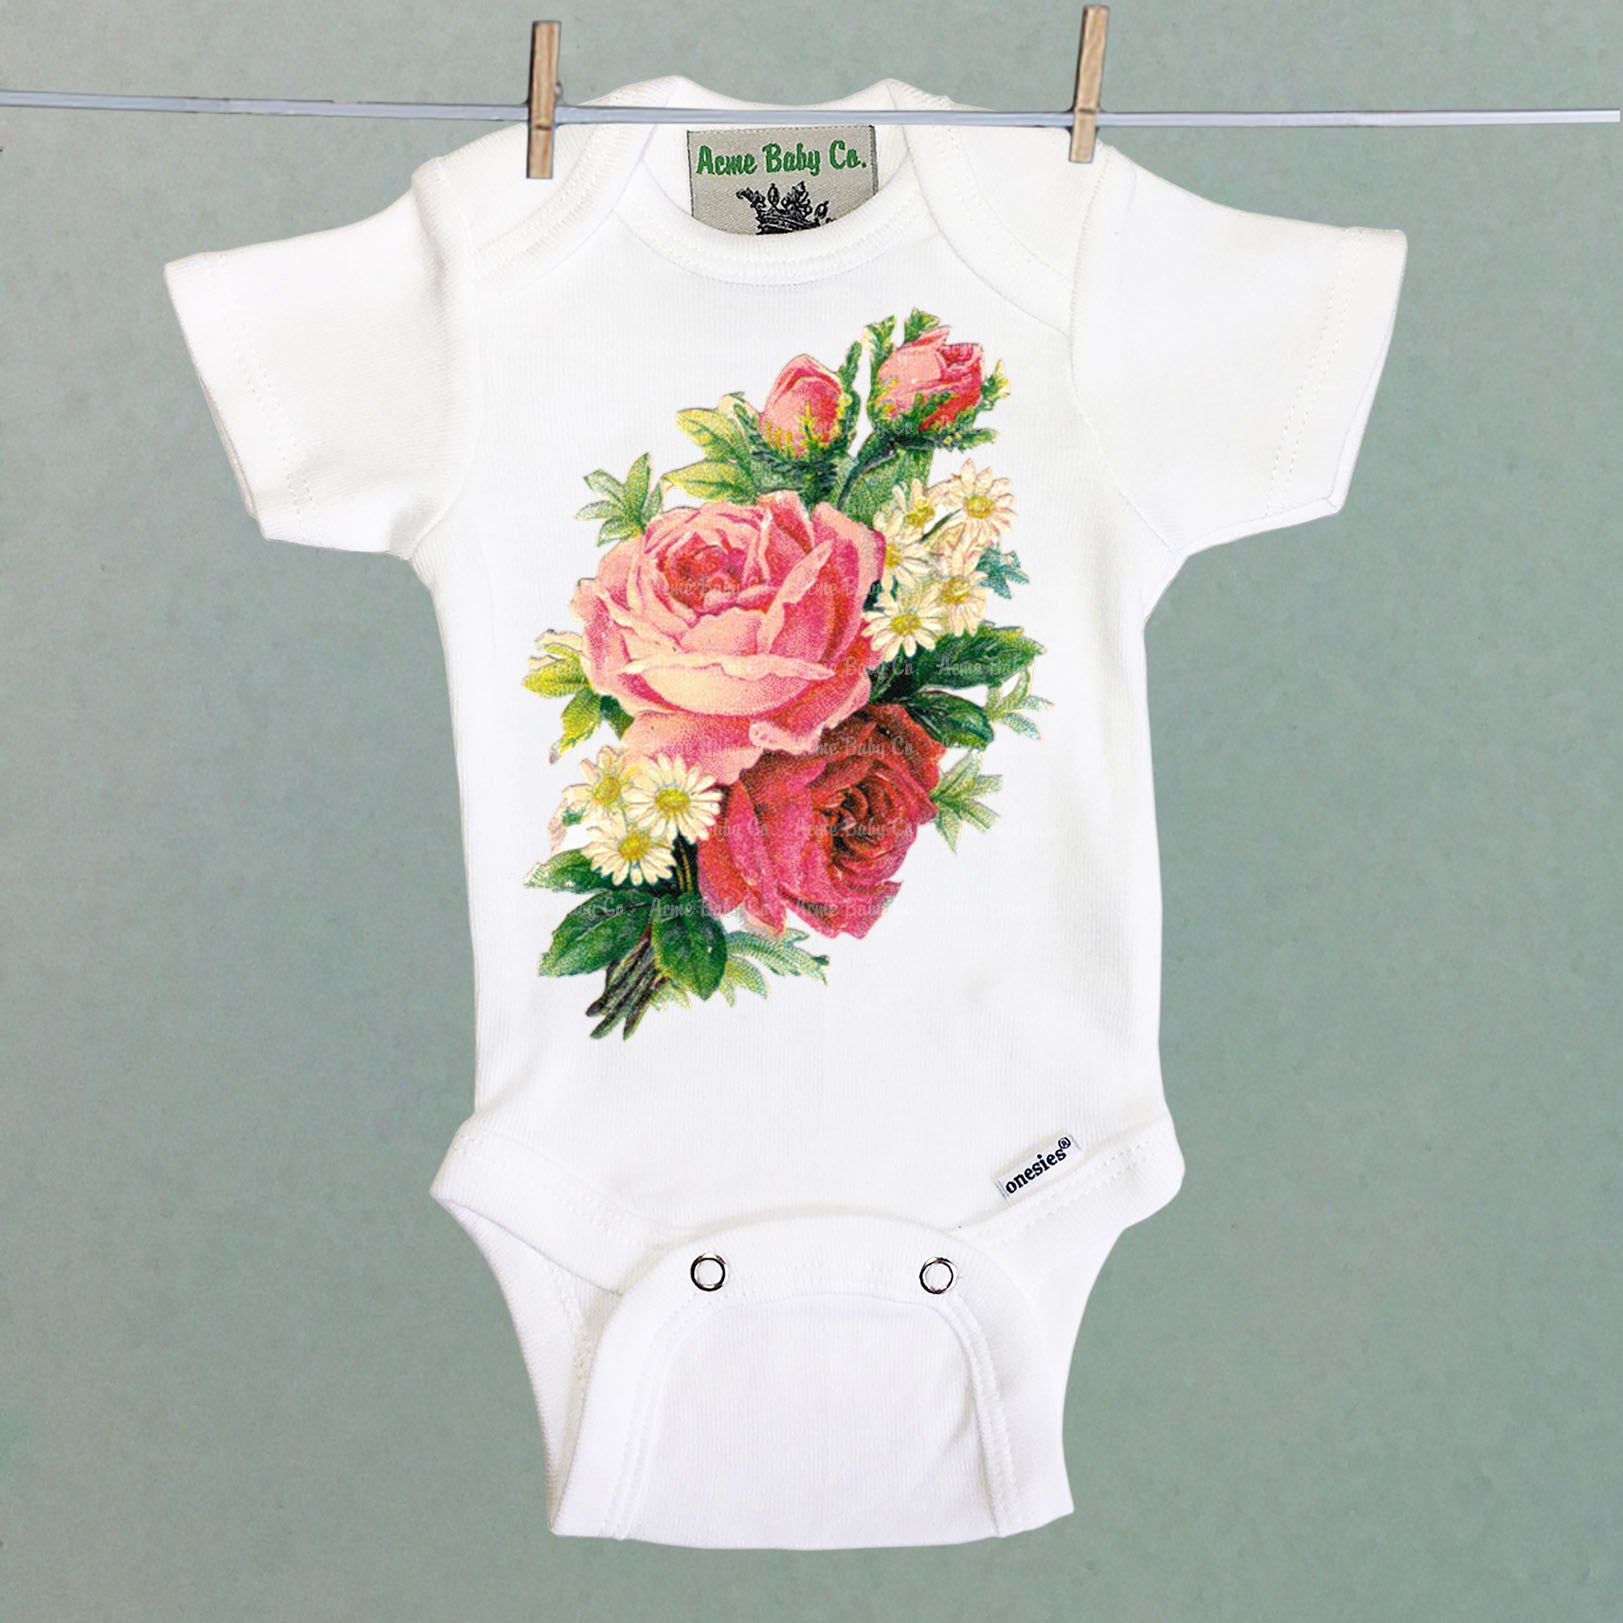 Roses and Daisies Organic One Piece Baby Bodysuit